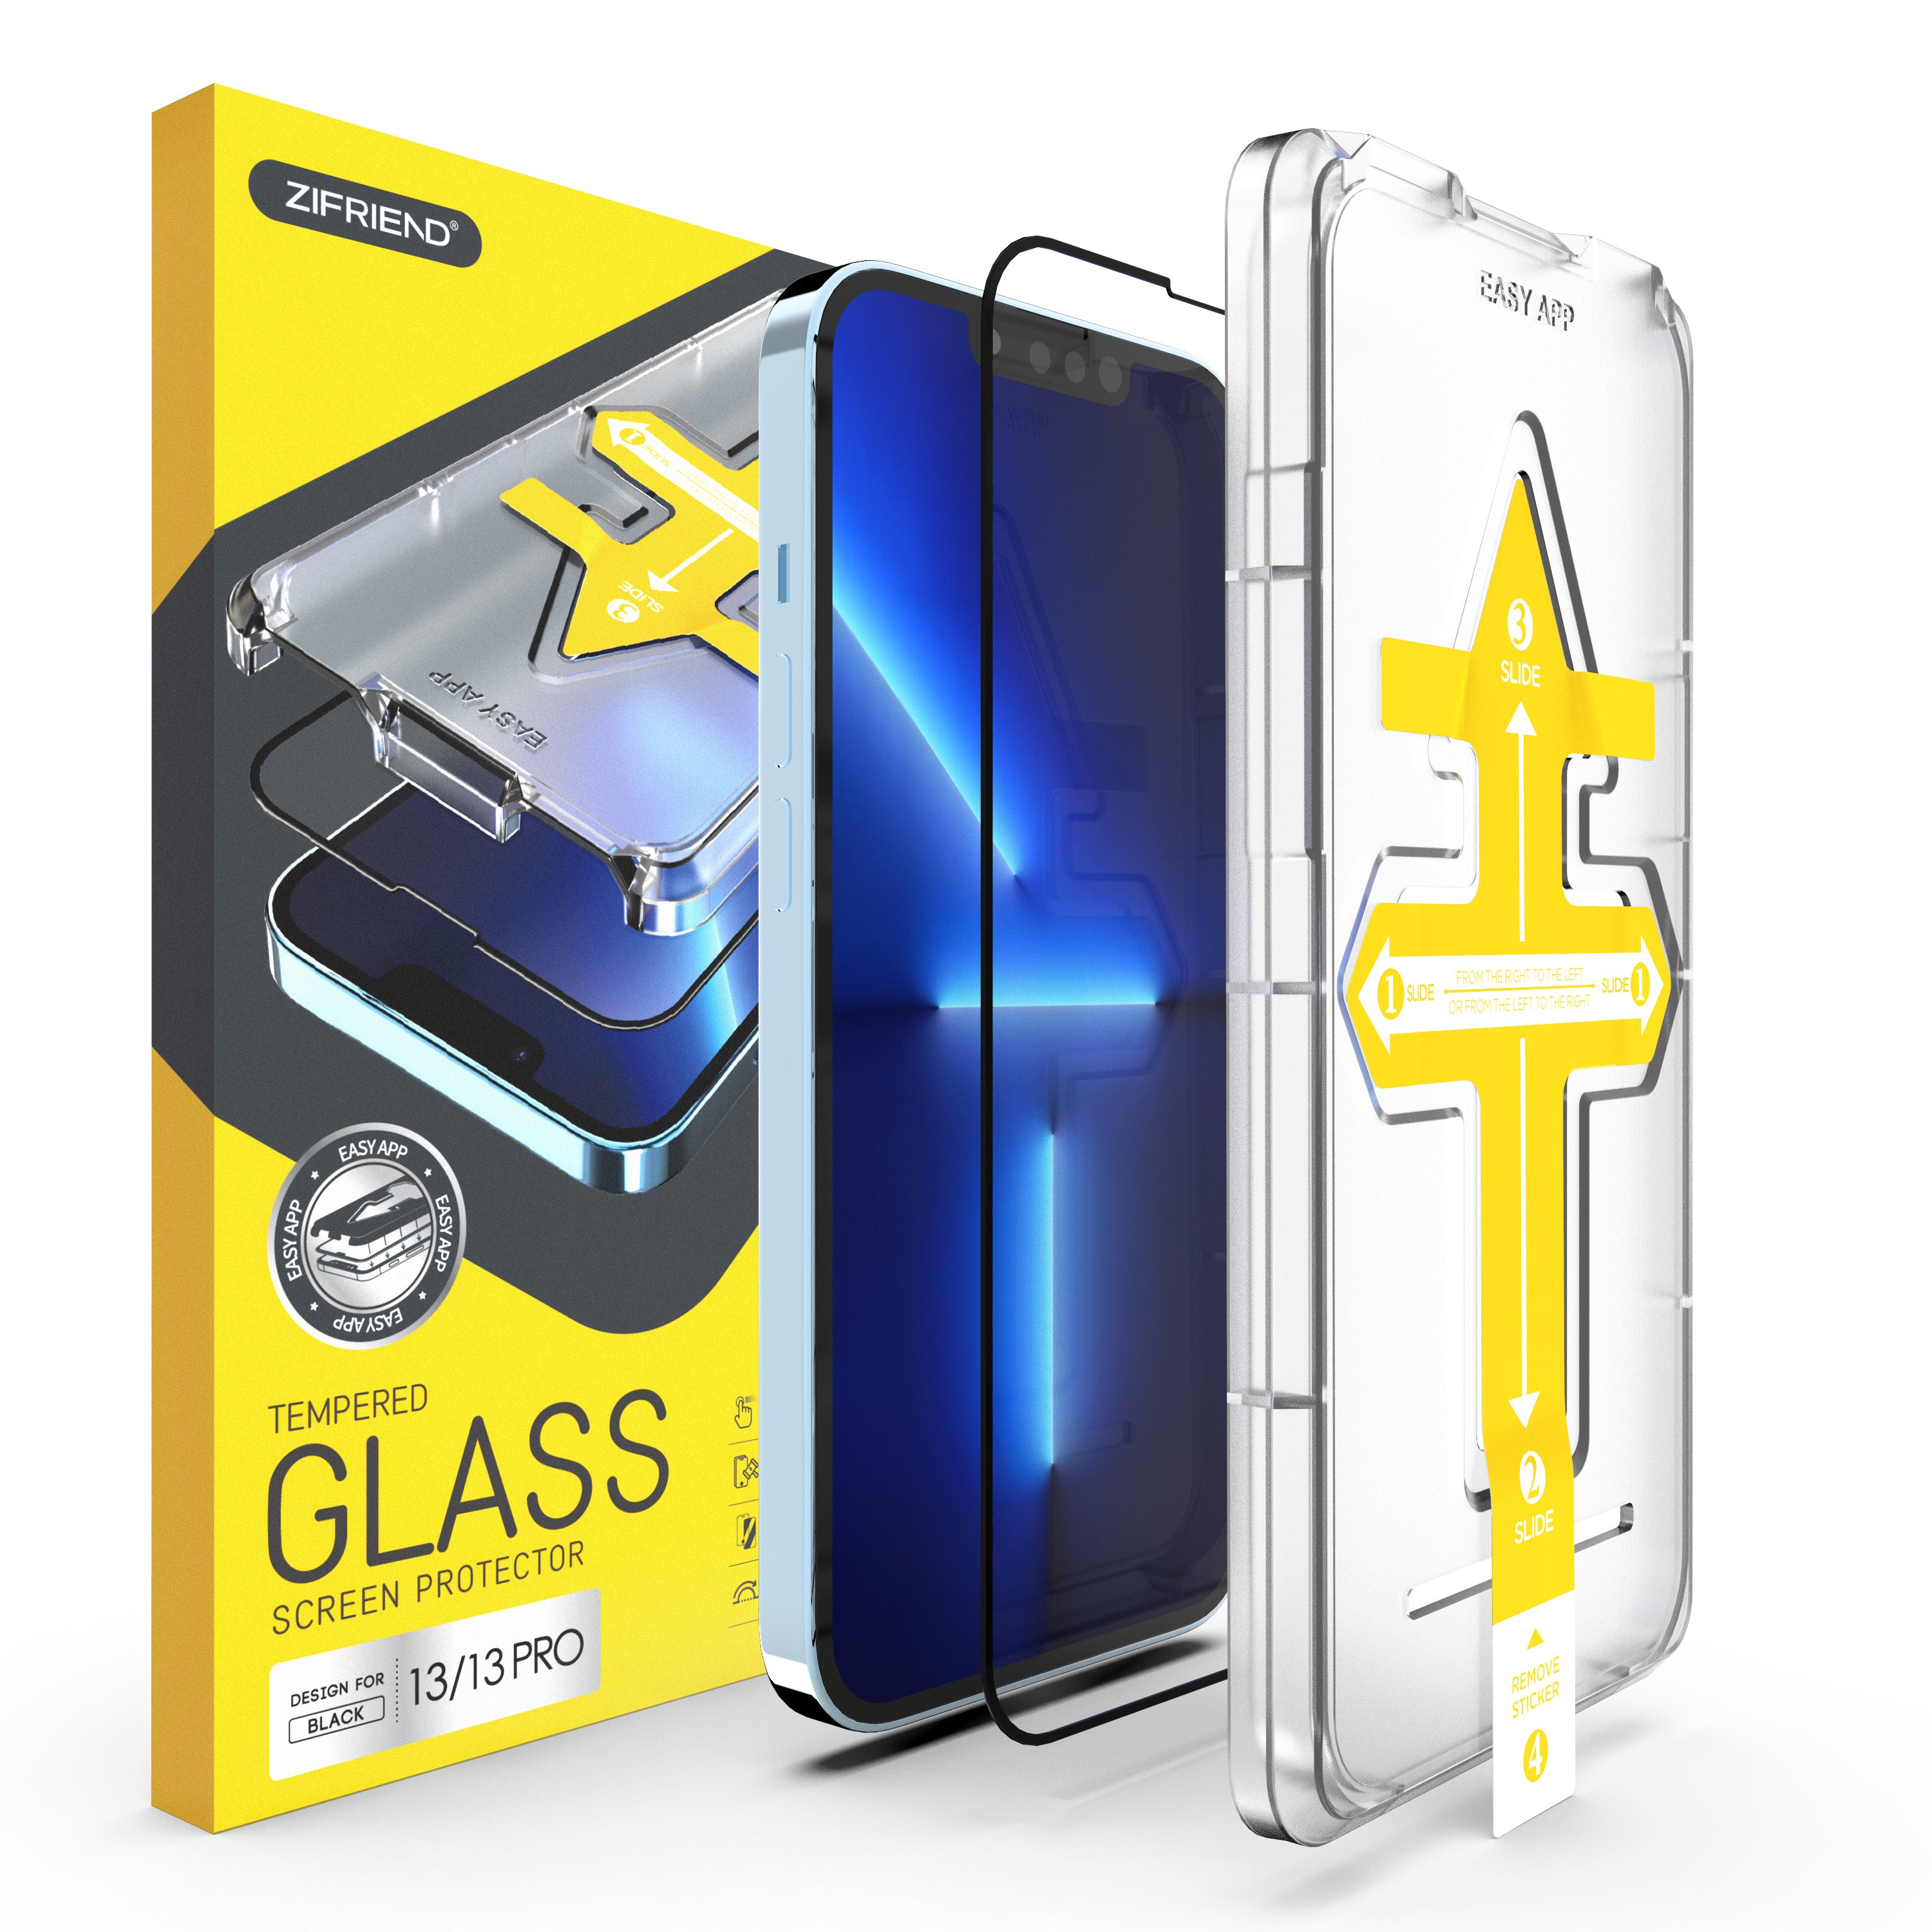 Zifriend Premium Glass Screen Protector for iPhone 13 Pro Max - Clear